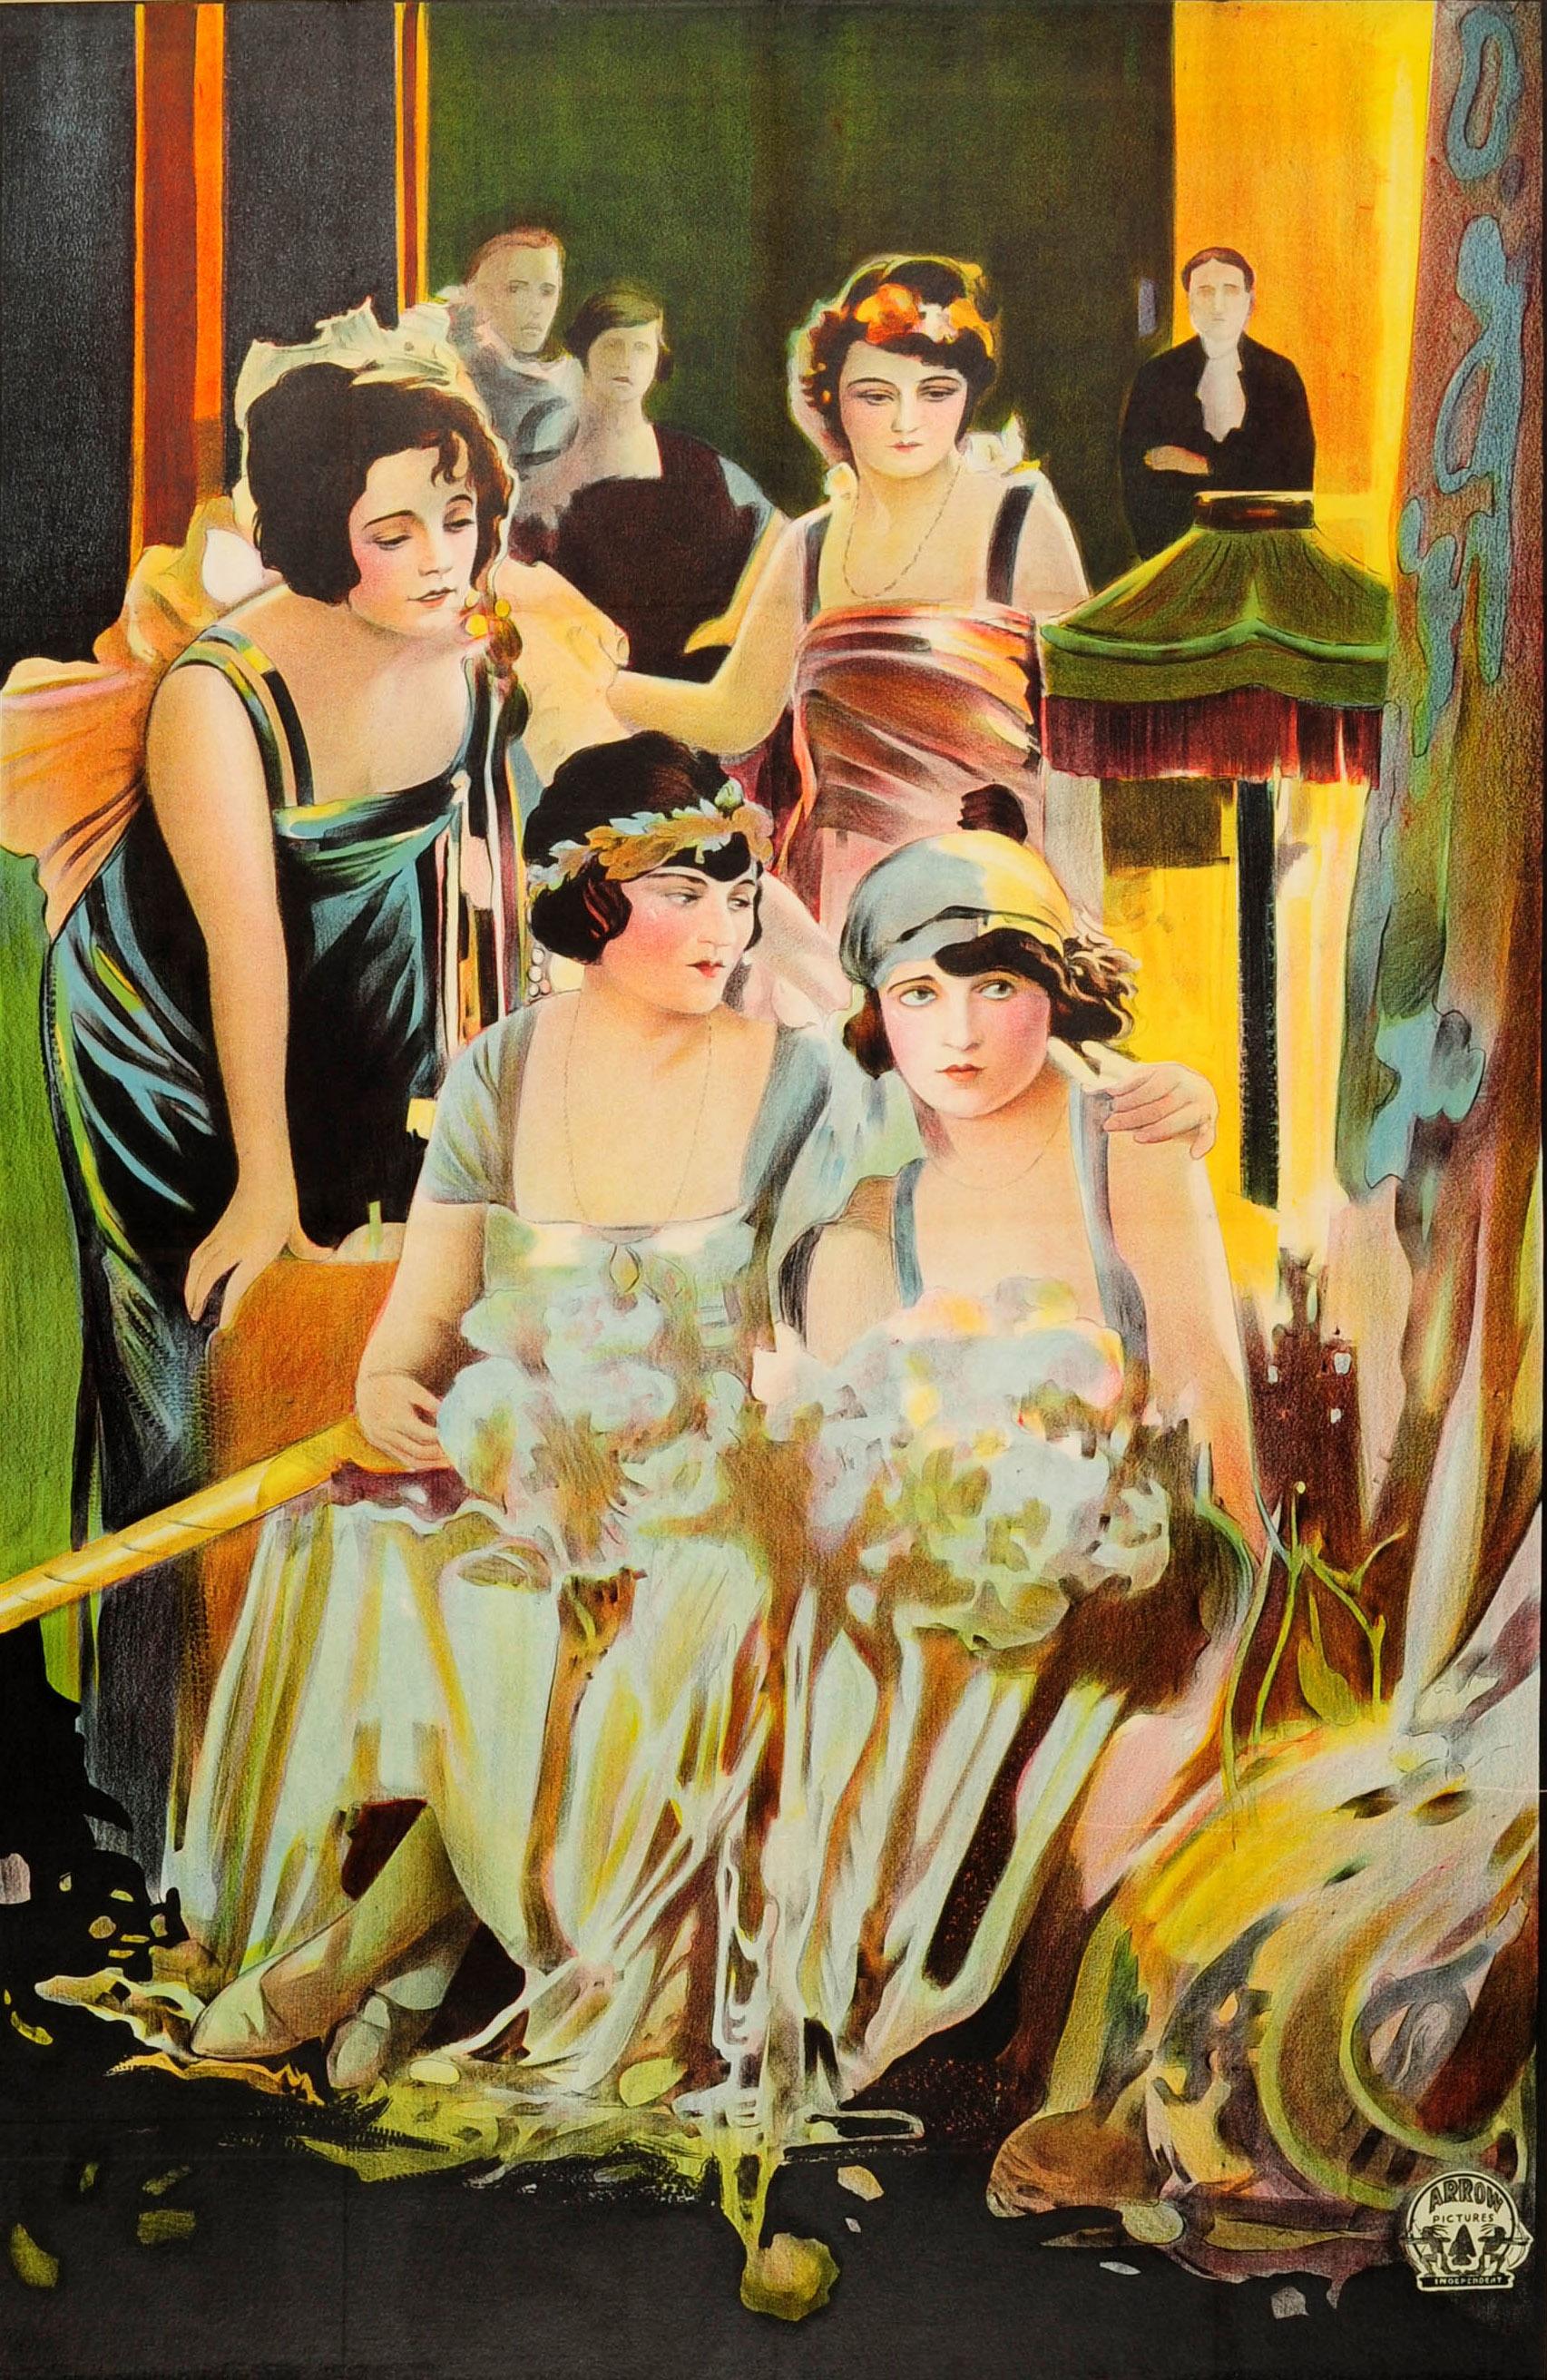 Original vintage three sheet movie poster for the UK release of the 1921 American film Luxury directed by Marcel Perez and starring Rubye De Remer (1892-1984) as Blanche Young with Walter Miller, Fred Kalgren and Grace Parker, presented by the